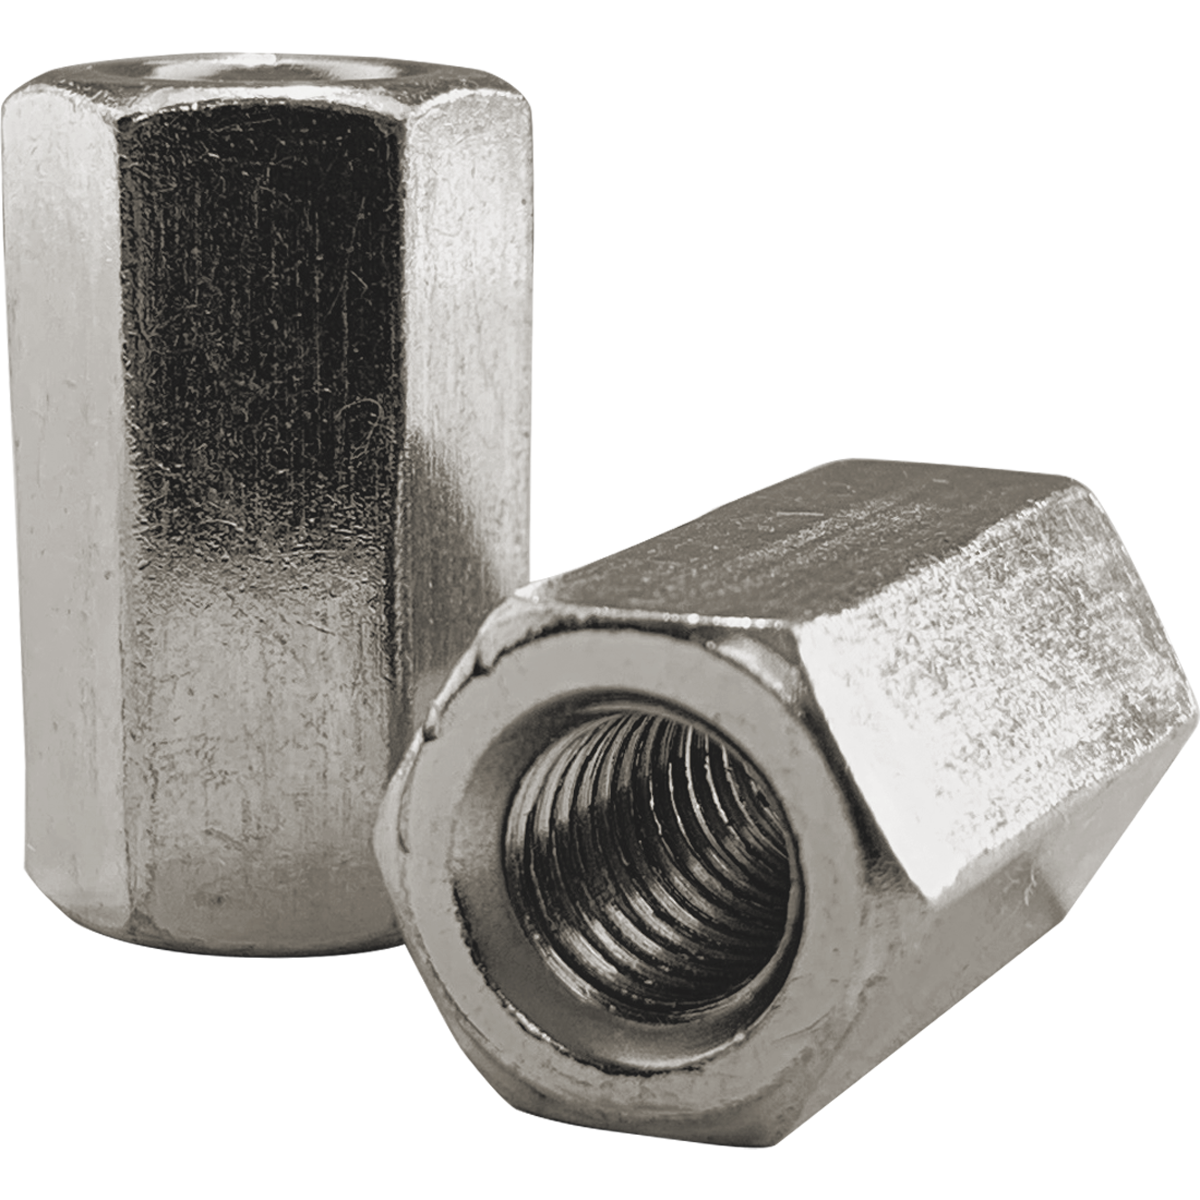 Corrosion resistant A2 stainless steel hexagonal connector nuts. A nut that also goes by the name of coupling nuts or extension nuts. Used for joining bolts and threaded bar.